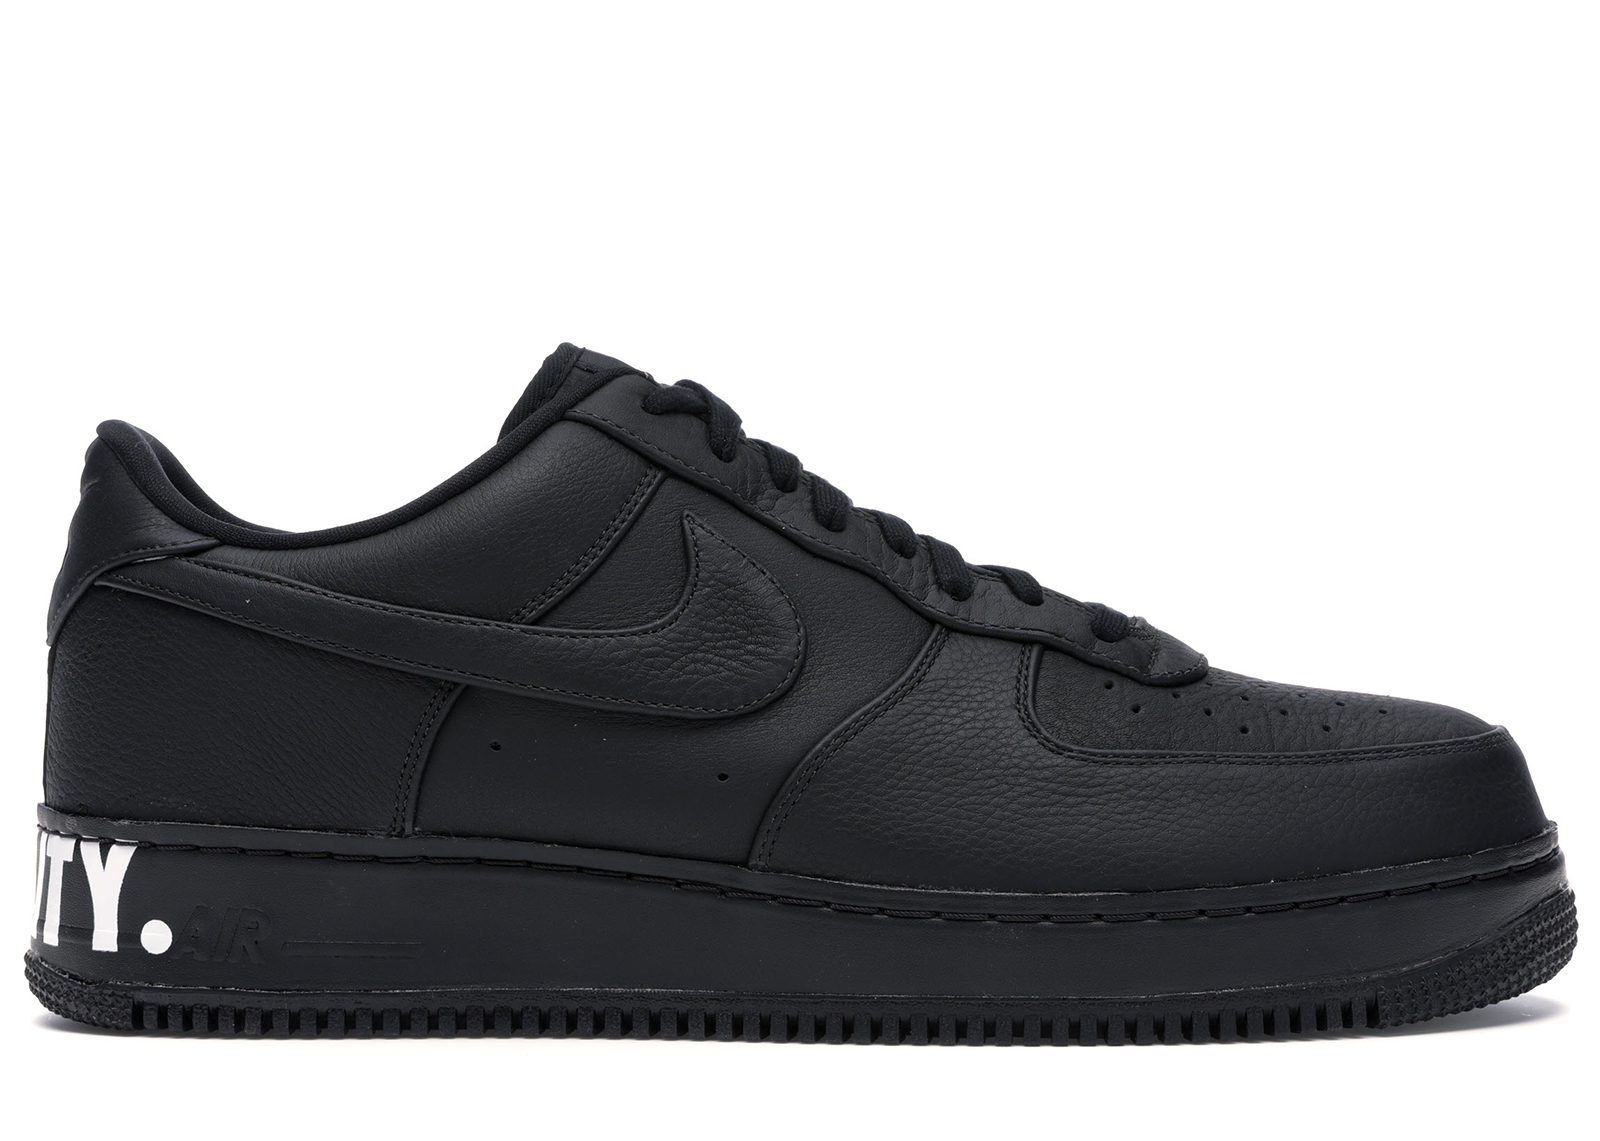 Nike Air Force 1 Low CMFT Equality Black History Month (2018)